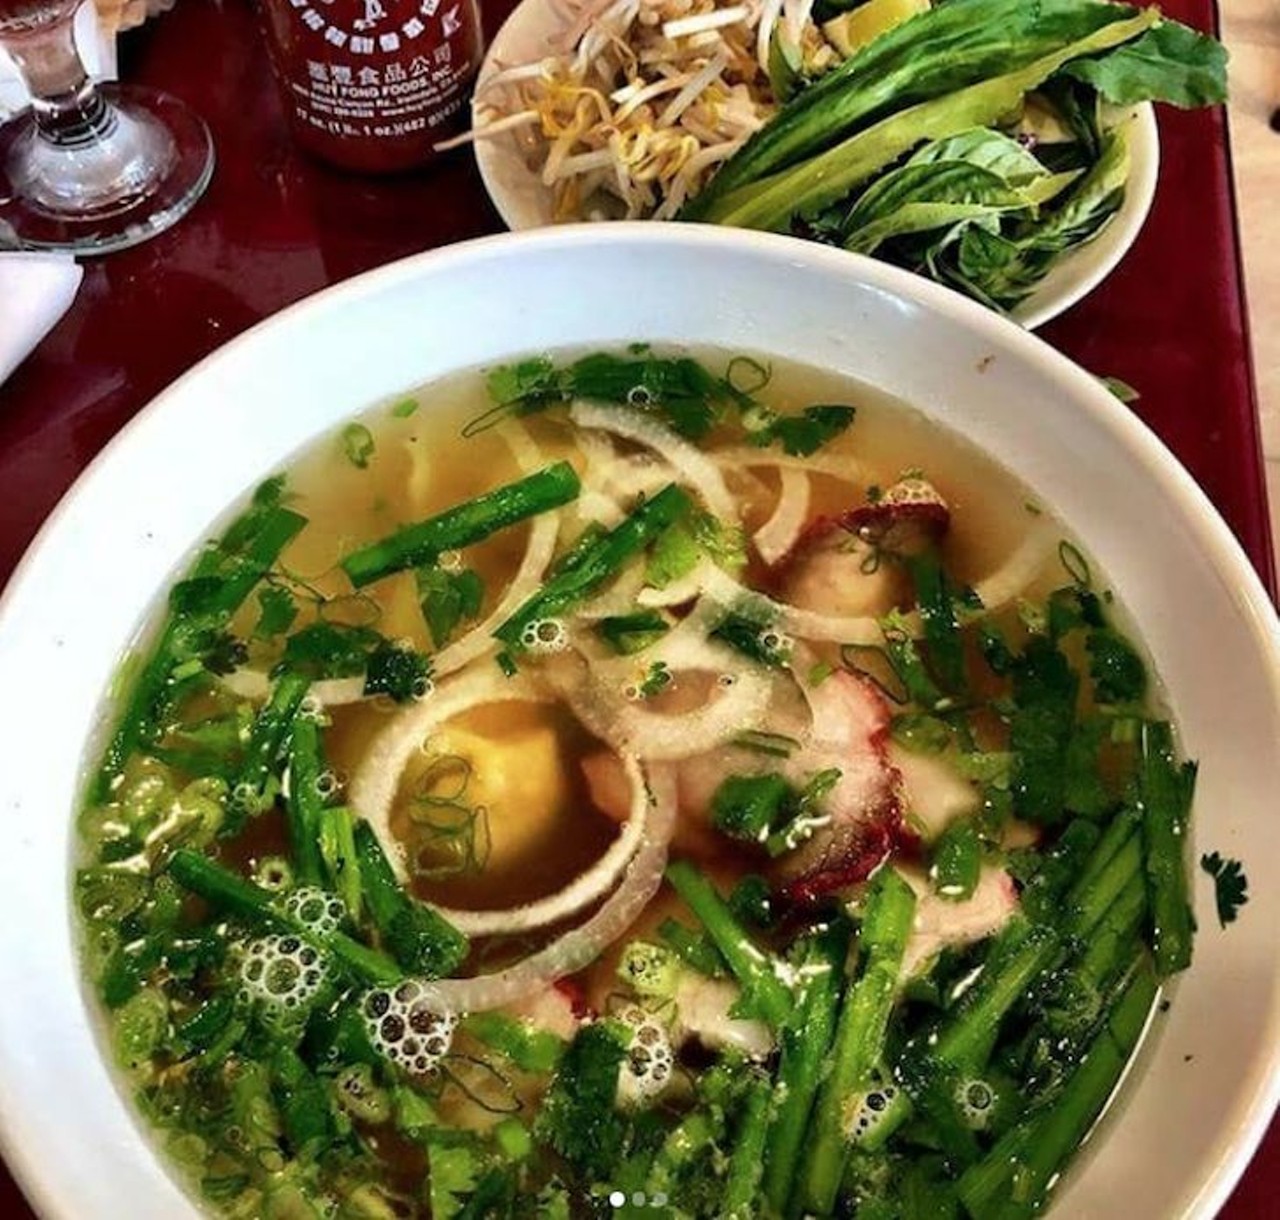 Four Guys Pho
505 FL-436, Casselberry, 32707 (407) 755-6670
Delectable spring rolls and a selection of pho soups are only the beginning at Four Guys Pho. There are tons of amazing chef specials at this Vietnamese cuisine hub that you have to try out.  
Photo via nickjroymba/Instagram